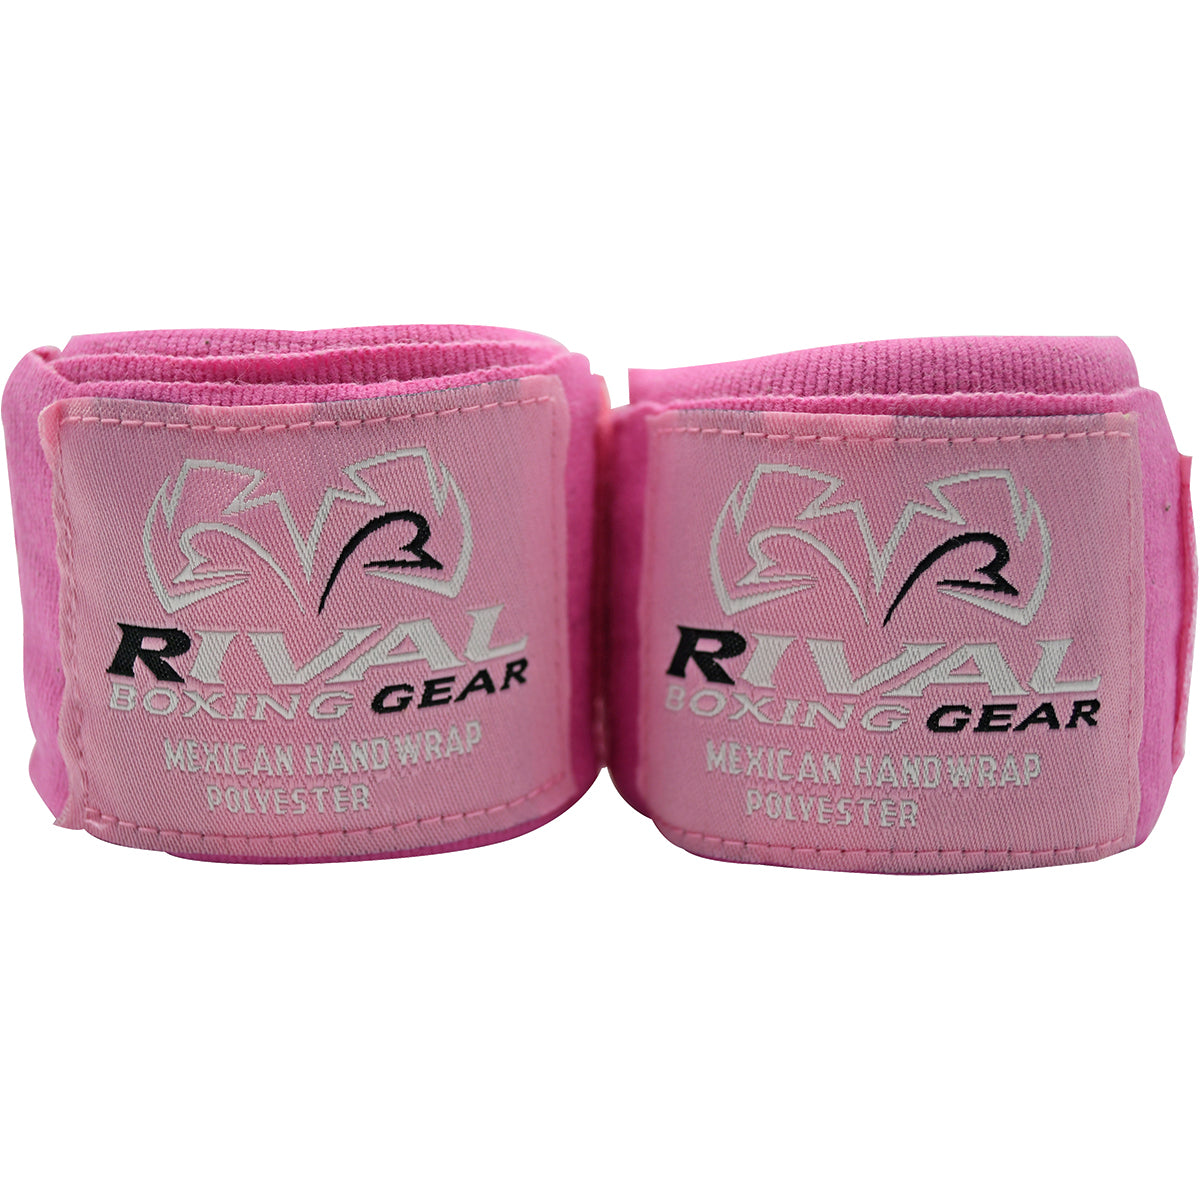 RIVAL Boxing Mexican Style Handwraps RIVAL